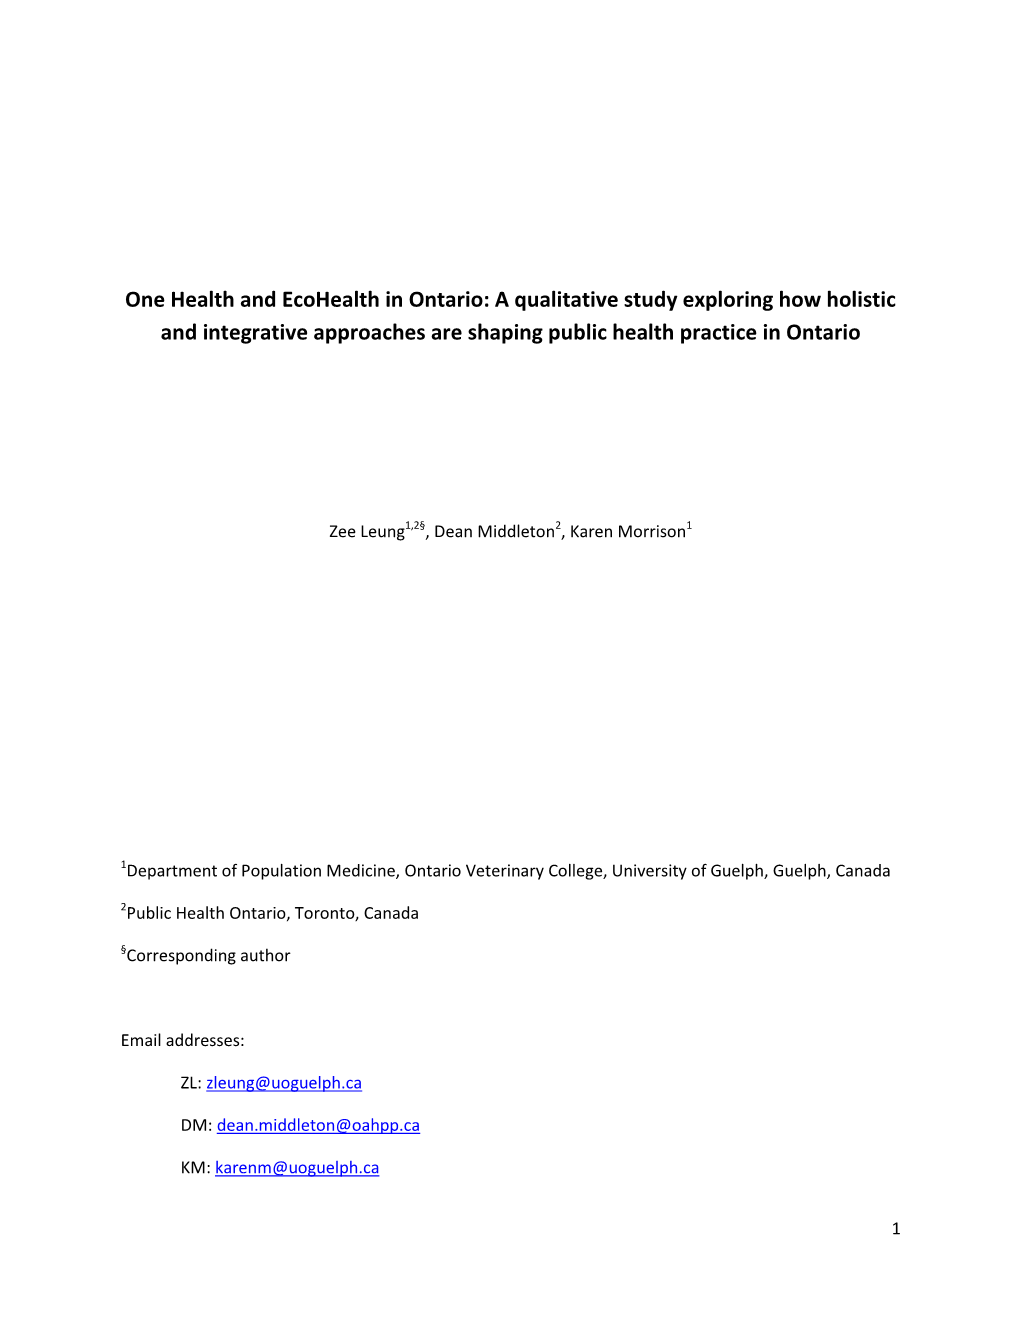 One Health and Ecohealth in Ontario: a Qualitative Study Exploring How Holistic and Integrative Approaches Are Shaping Public Health Practice in Ontario